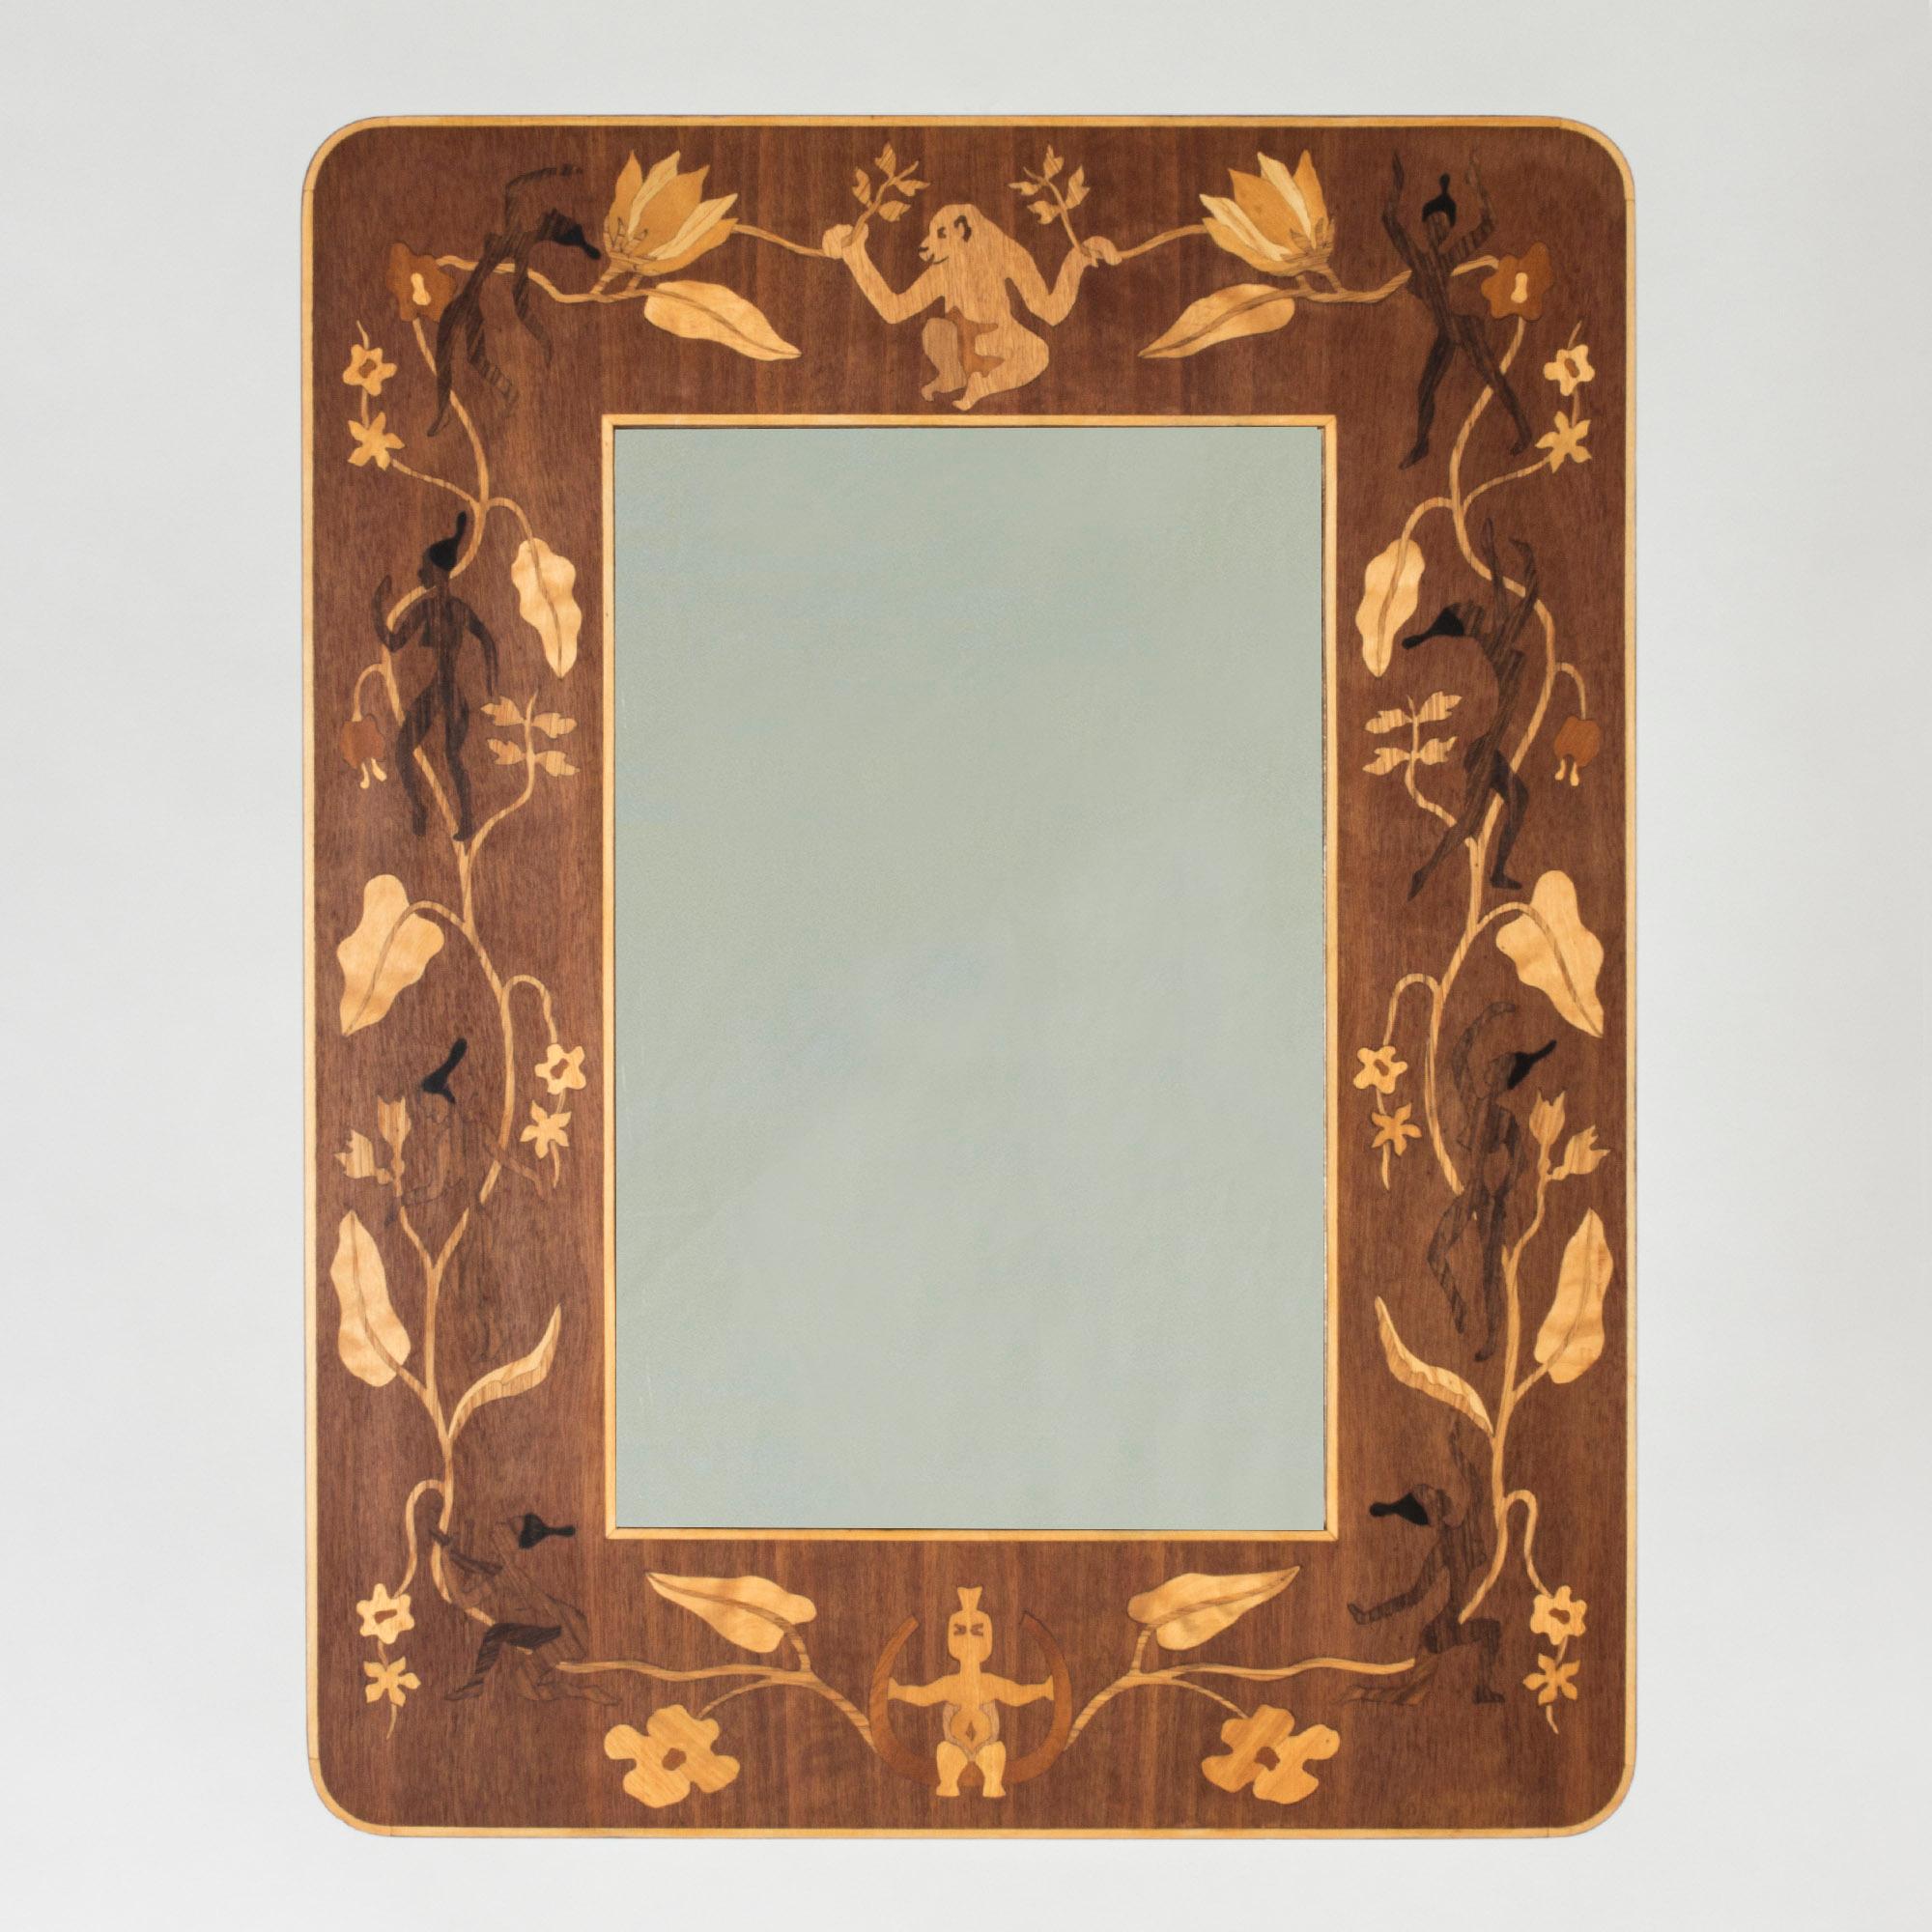 Beautiful wooden mirror from Bohus Intarsia with a motif called “Adoration”. Inlays of contrasting wood depict flowers and leaves, interlacing with women, a monkey and a whimsical character at the bottom. The types of wood used are listed on the